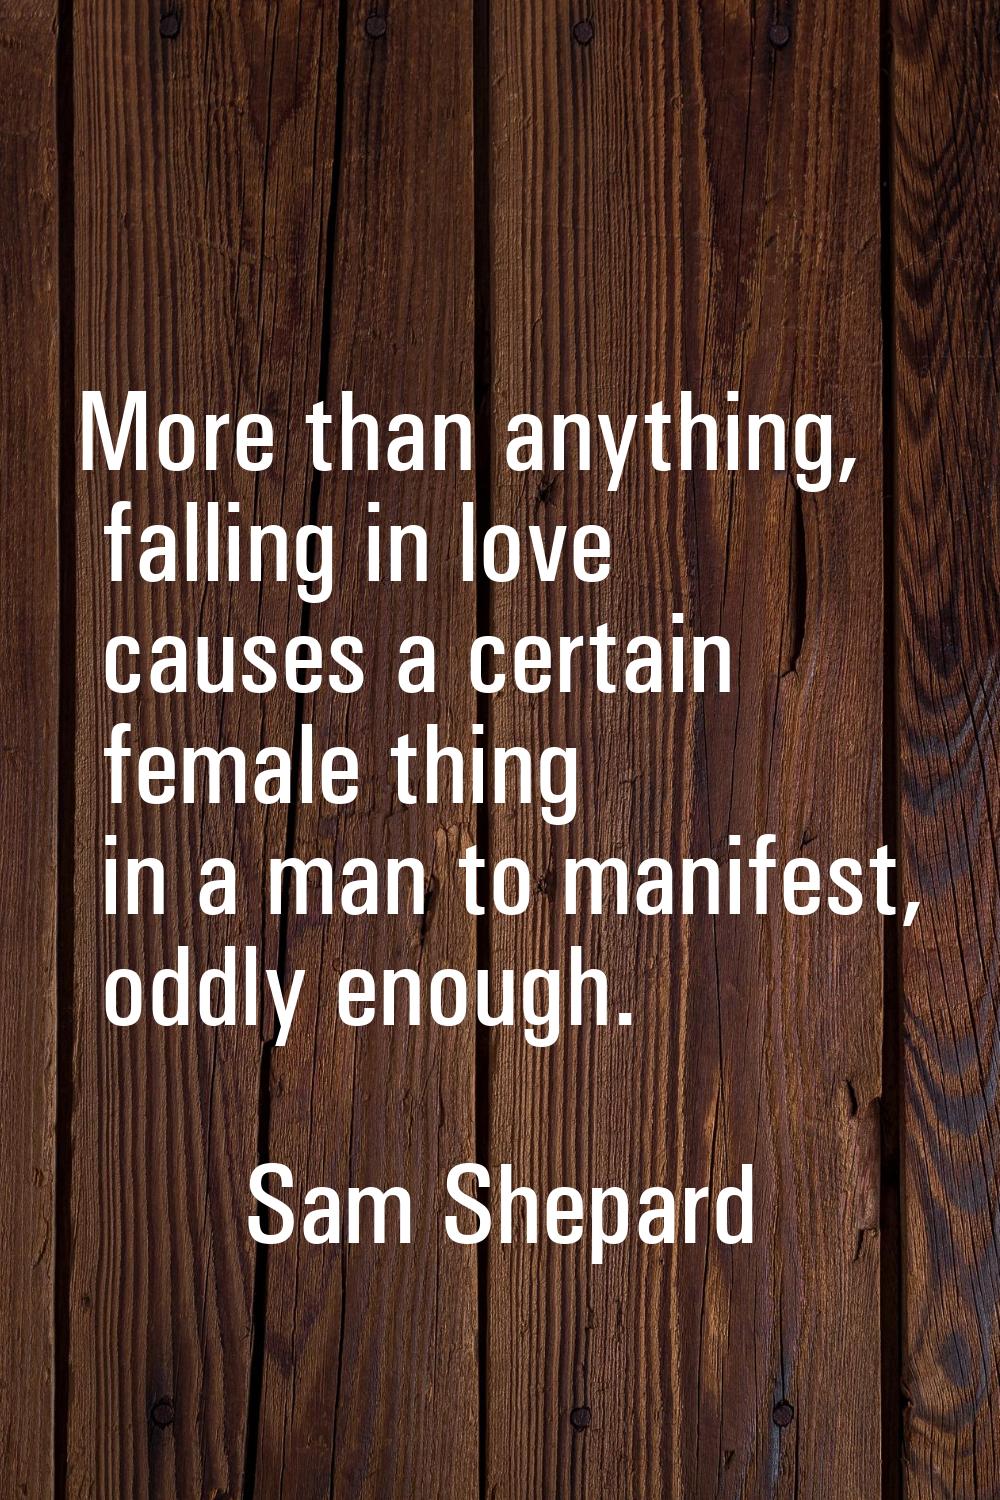 More than anything, falling in love causes a certain female thing in a man to manifest, oddly enoug